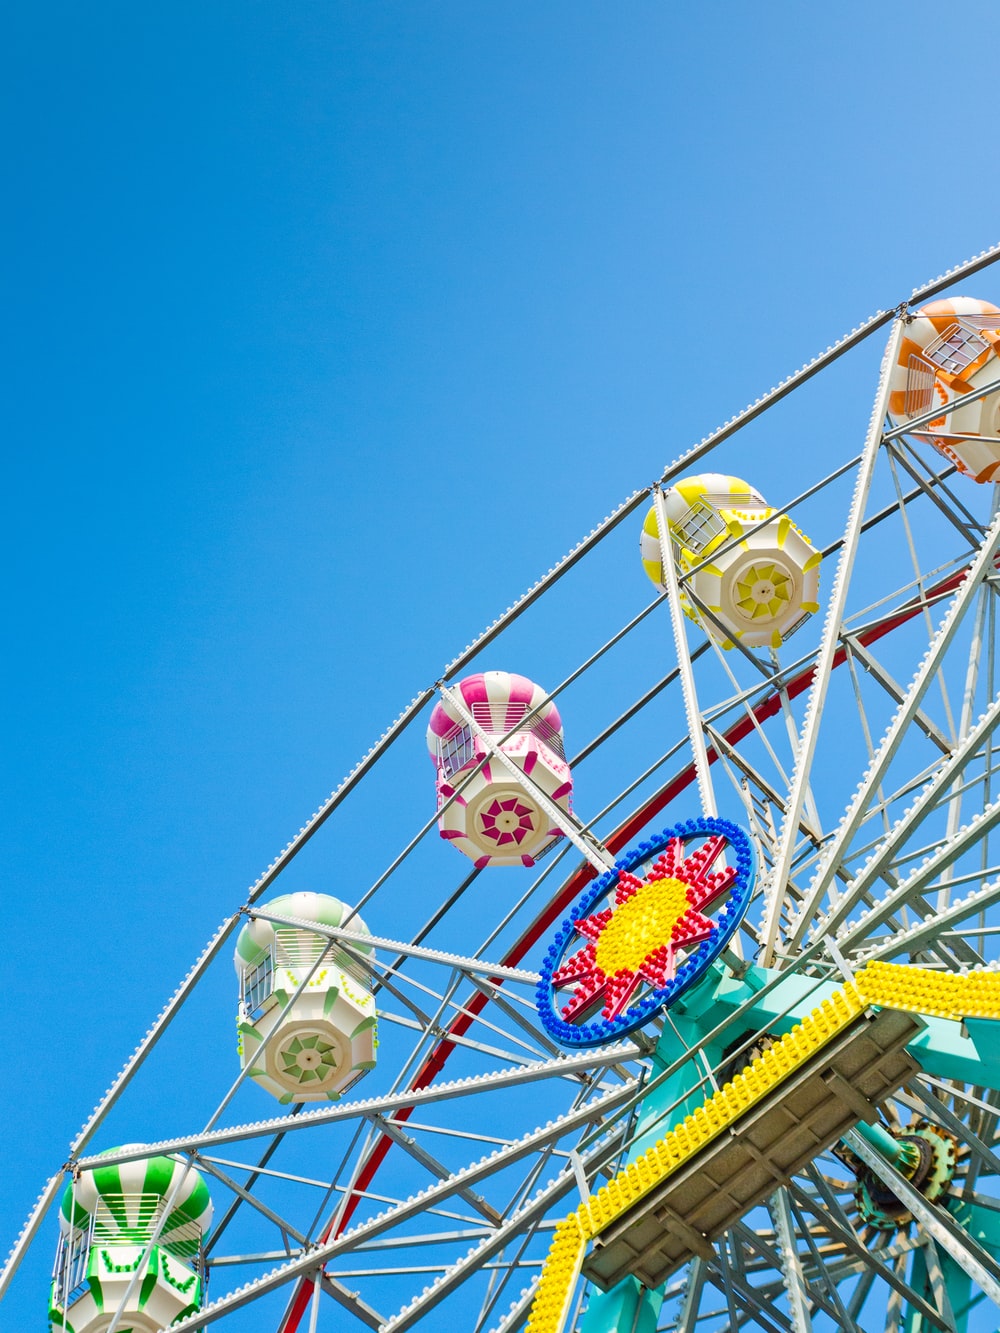 Funfair Picture. Download Free Image